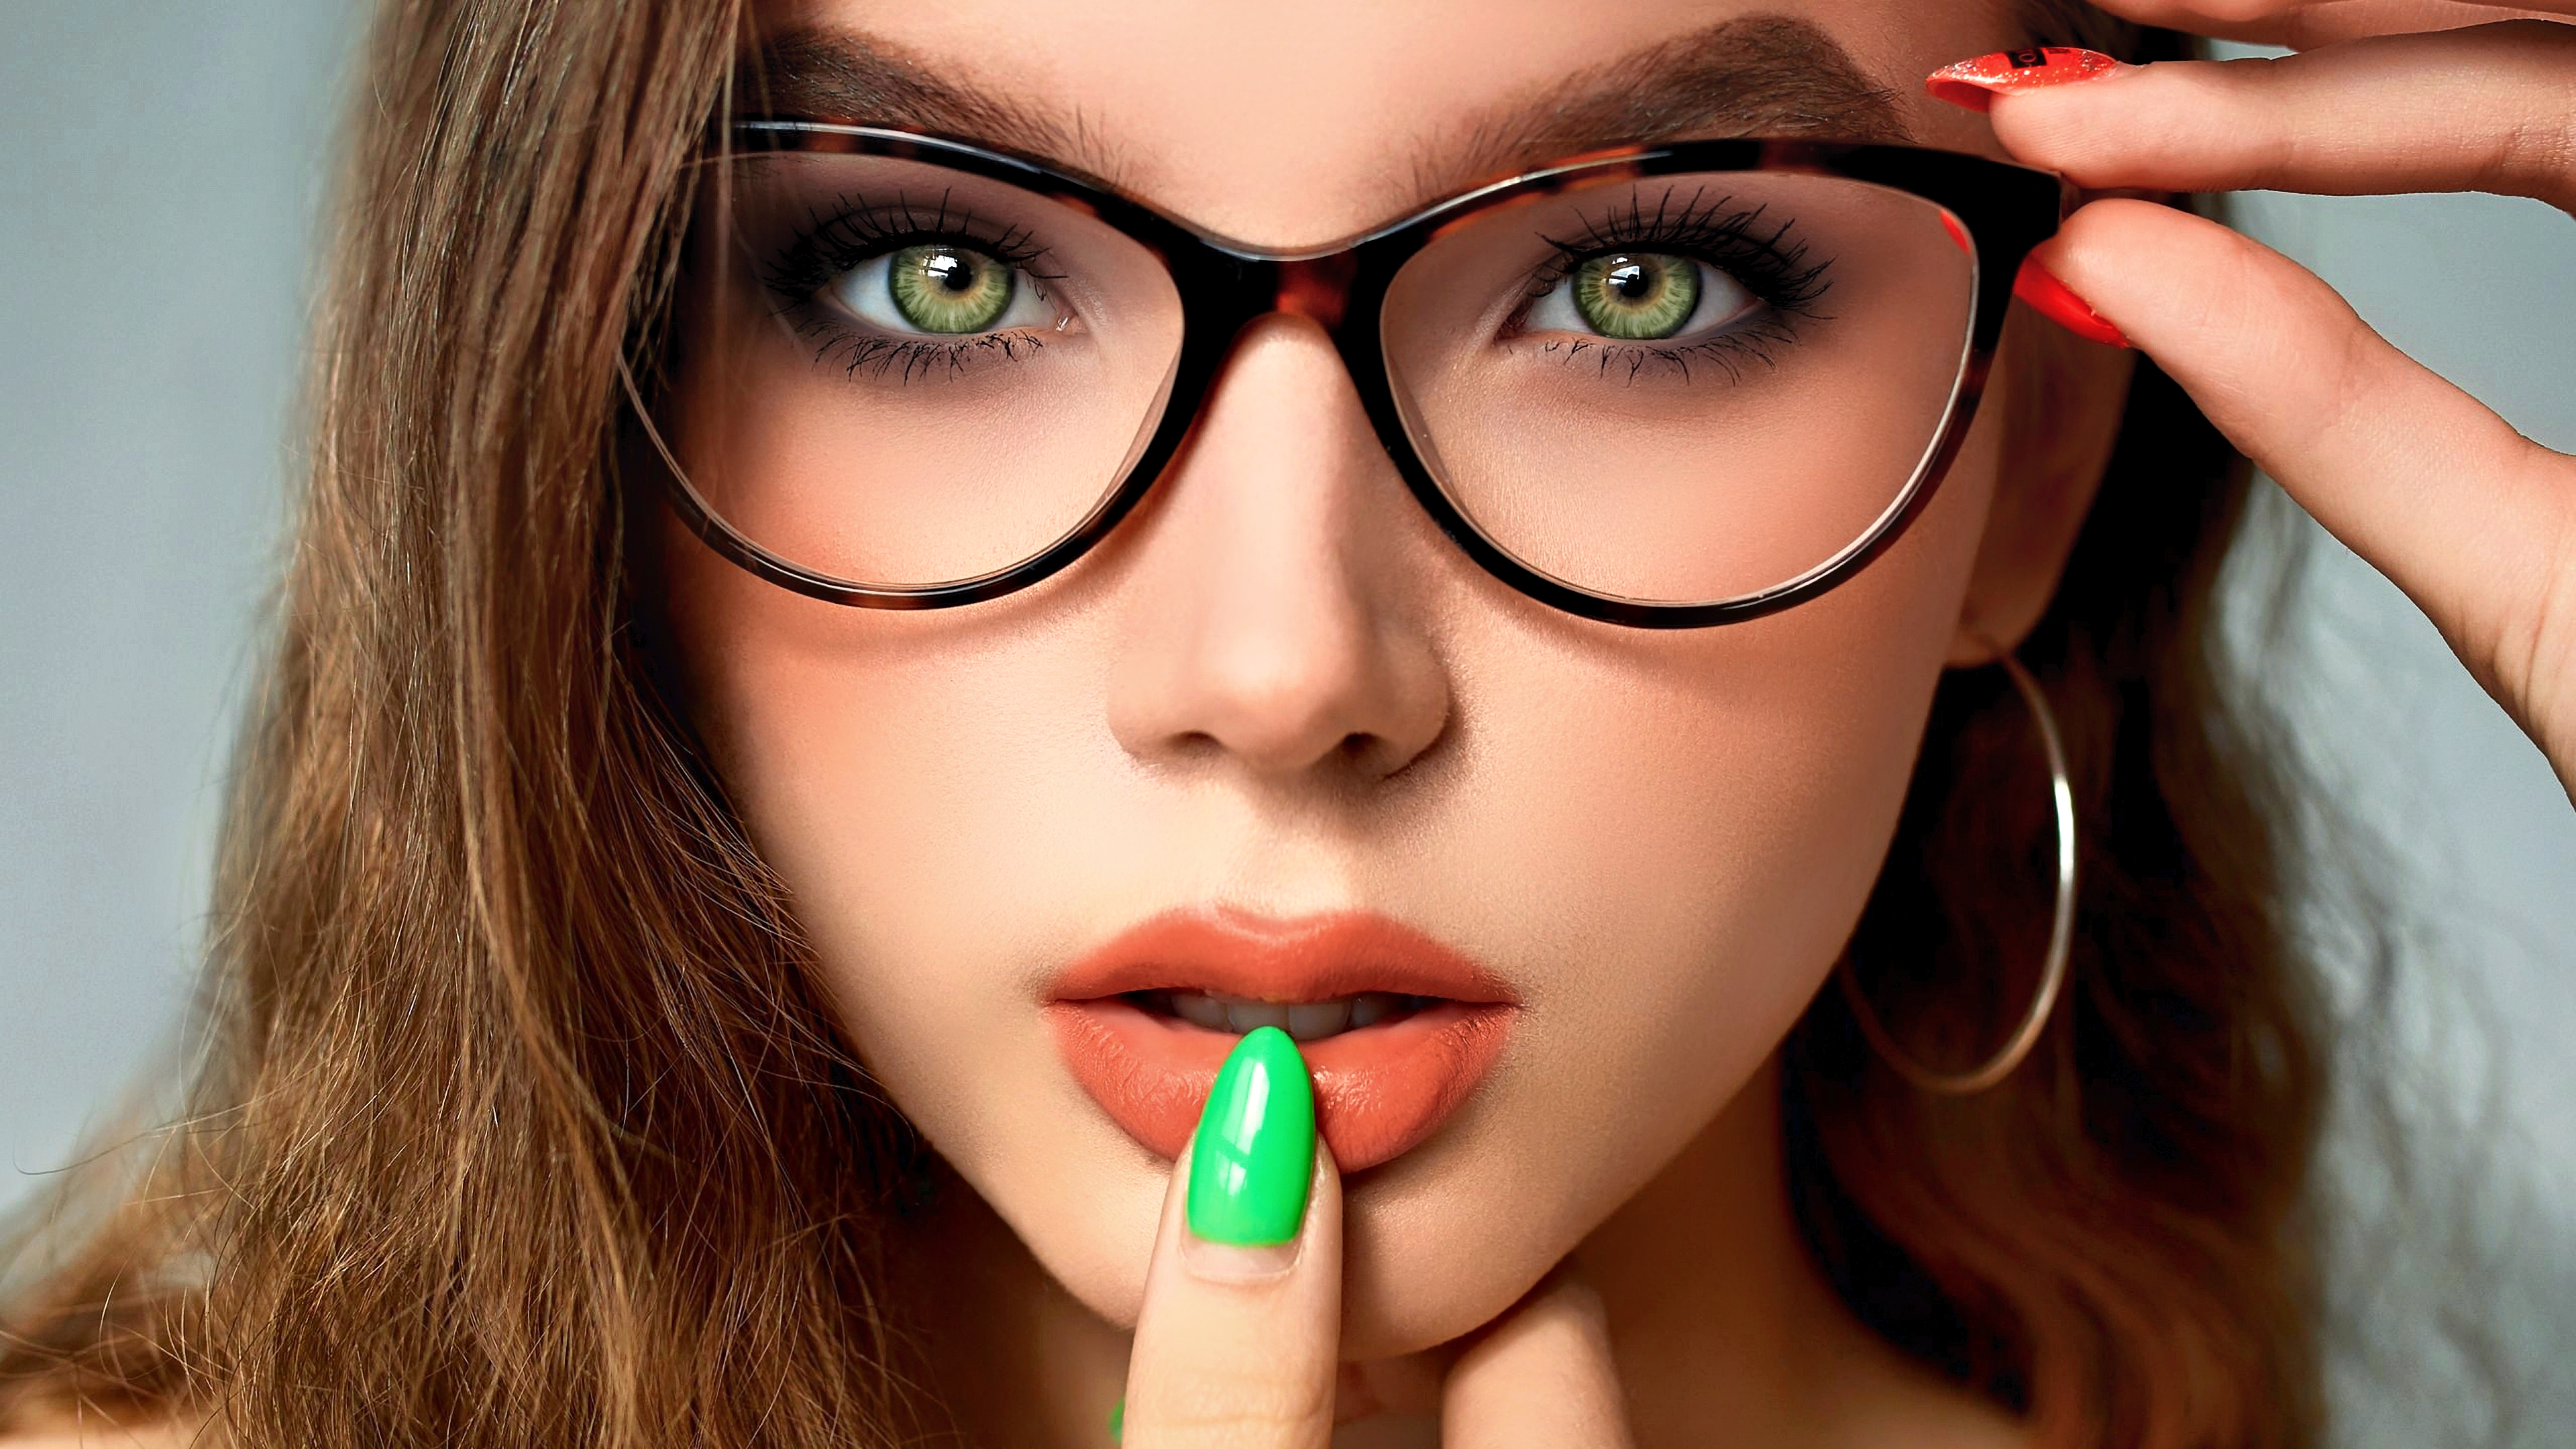 People 3840x2160 model photography women long hair face painted nails women with glasses portrait closeup hoop earrings finger on lips green eyes touching glasses green nails